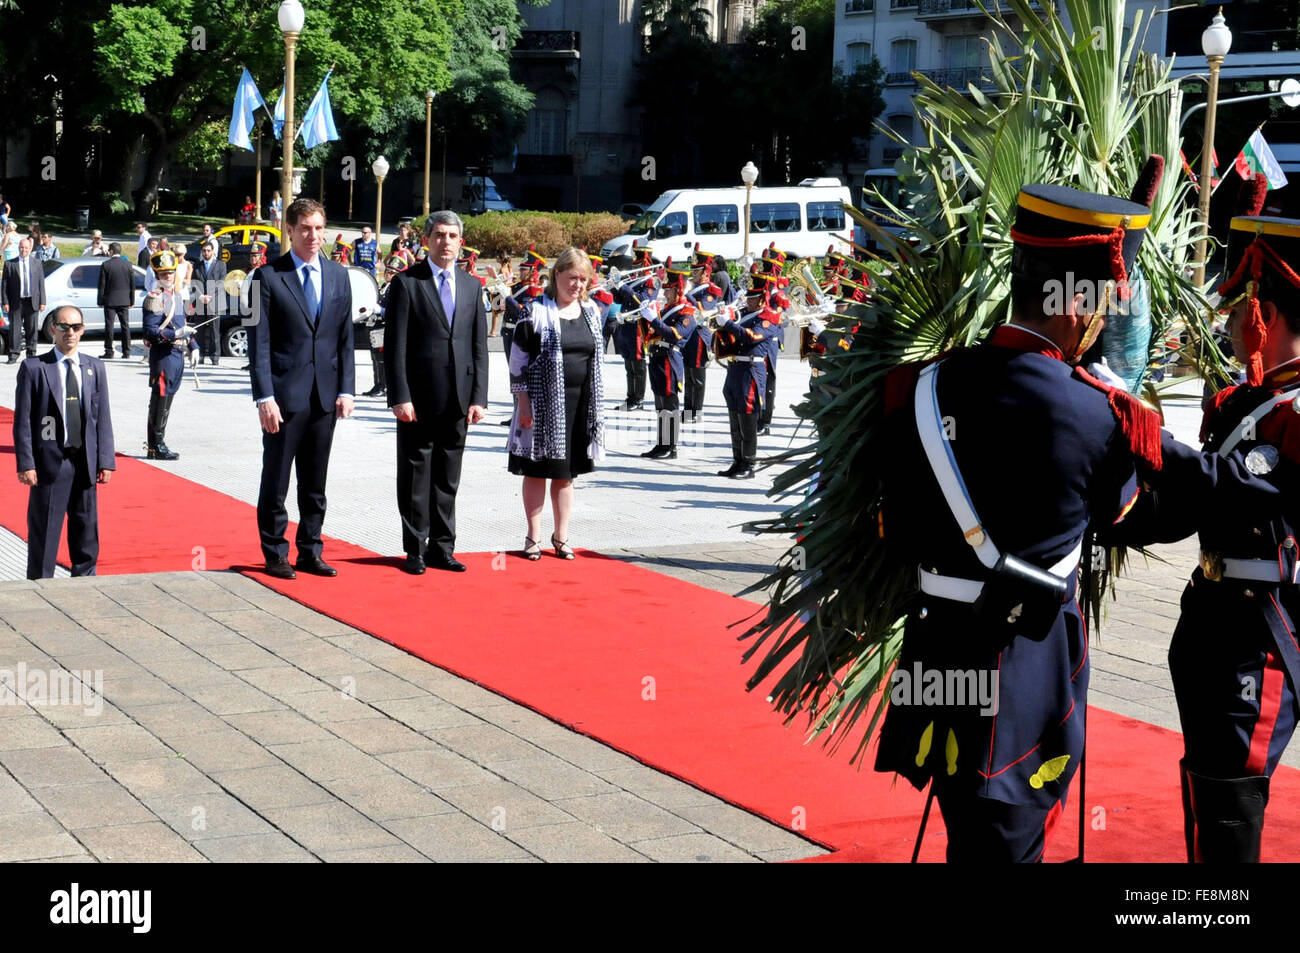 Buenos Aires, Argetina. 4th Feb, 2016. Bulgaria's President Rosen Plevneliev (C) and Argentine Foreign Minister Susana Malcorra (R), attend a wreath ceremony at General San Martin Monument, in Plaza San Martin, in Buenos Aires, Argetina, on Feb. 4, 2016. Rosen Plevneliev is on an official visit in Argentina. © Daniel Garagiola/Prensa Canciller¨ªa/TELAM/Xinhua/Alamy Live News Stock Photo